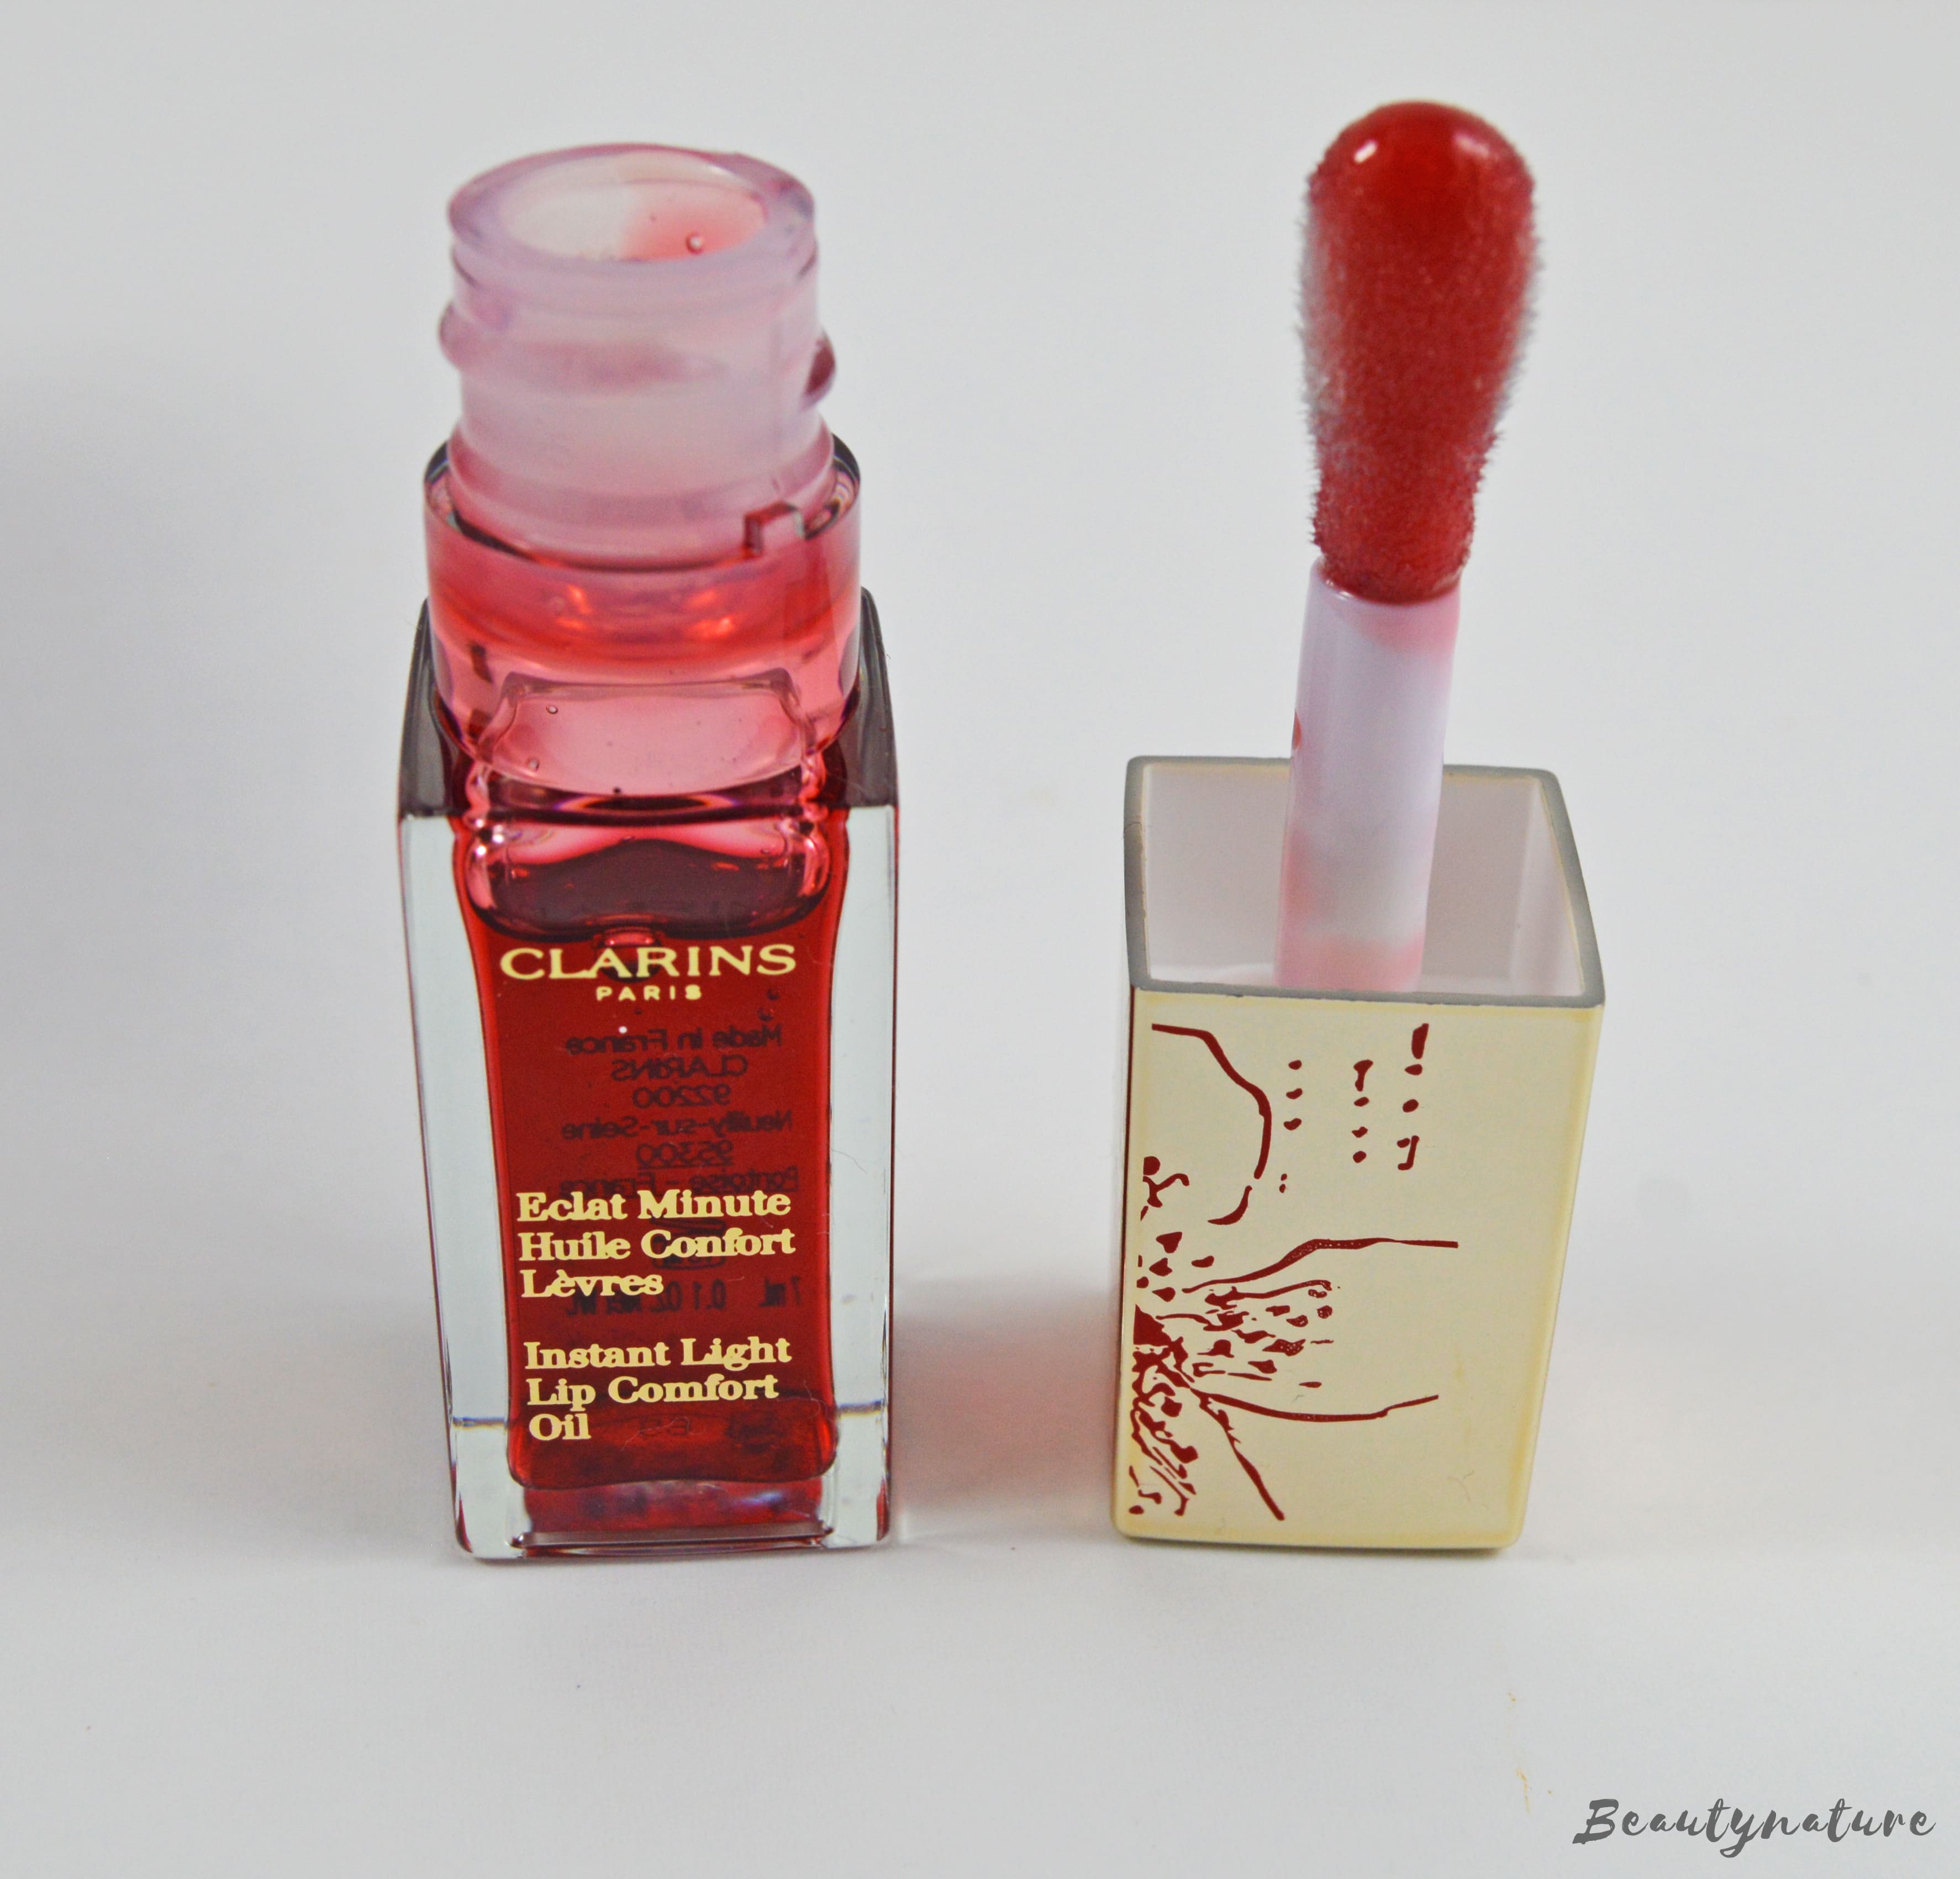 Clarins - Eclat Minute Huile Confort Lèvres Limitied Edition